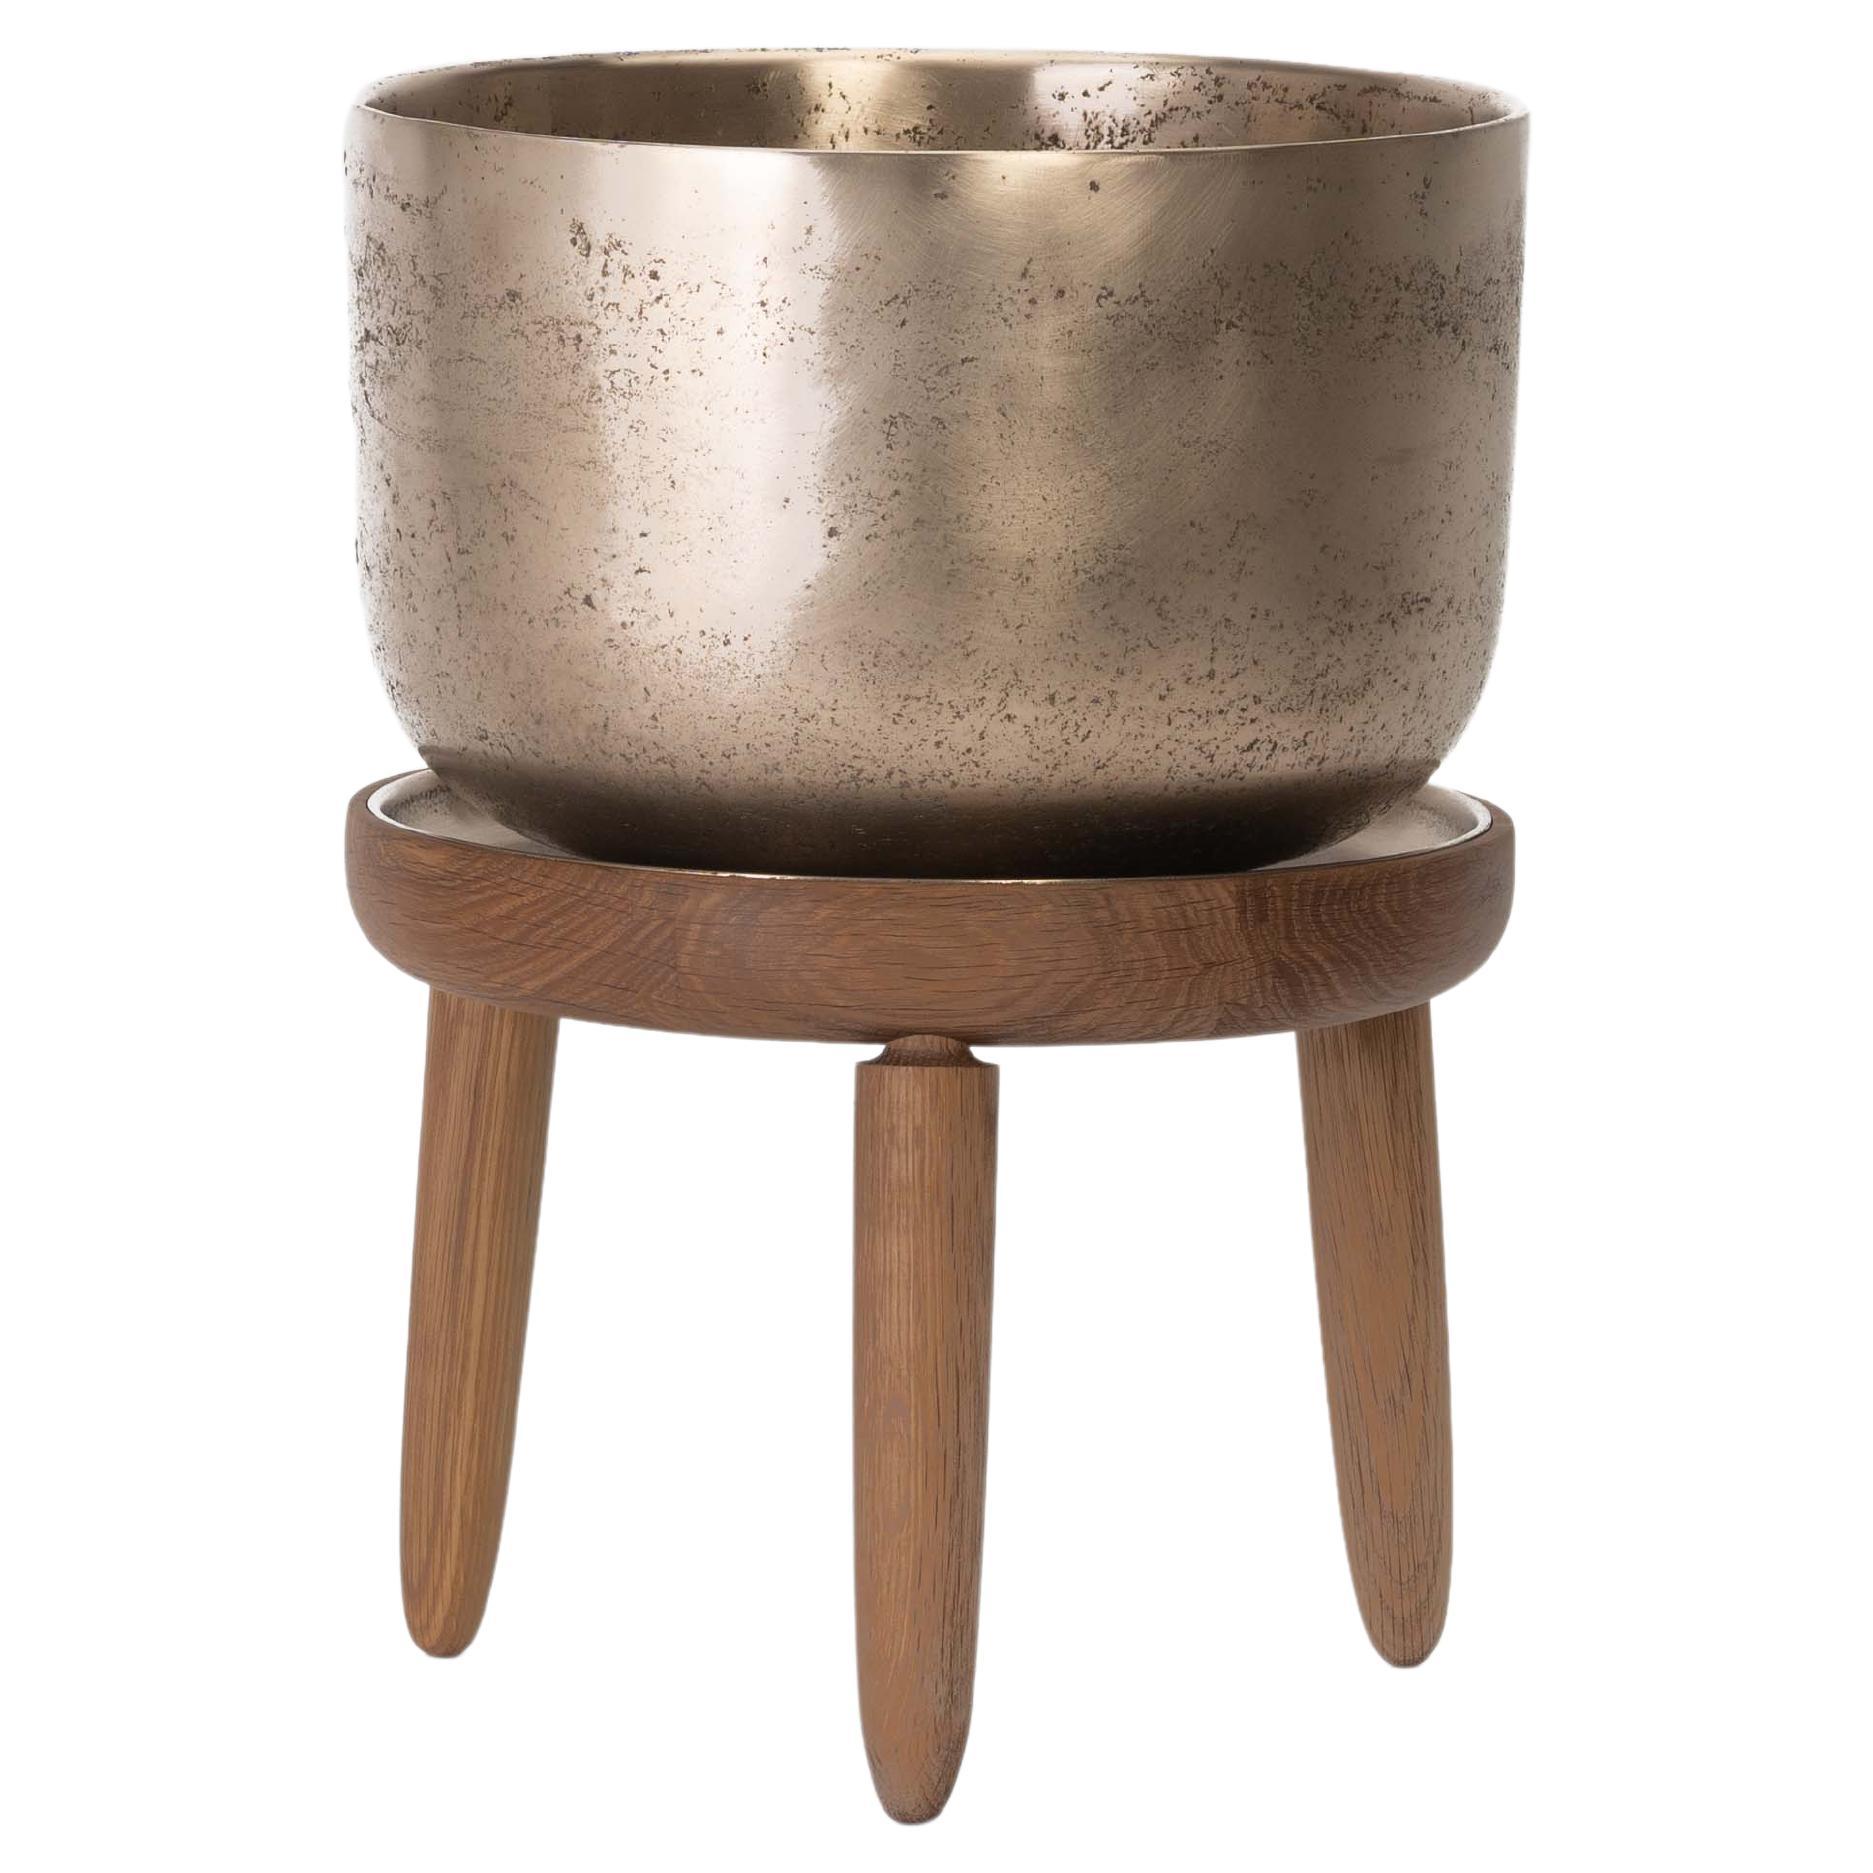 Baré Planter, White Oak with Cast Bronze Planter and Tray For Sale